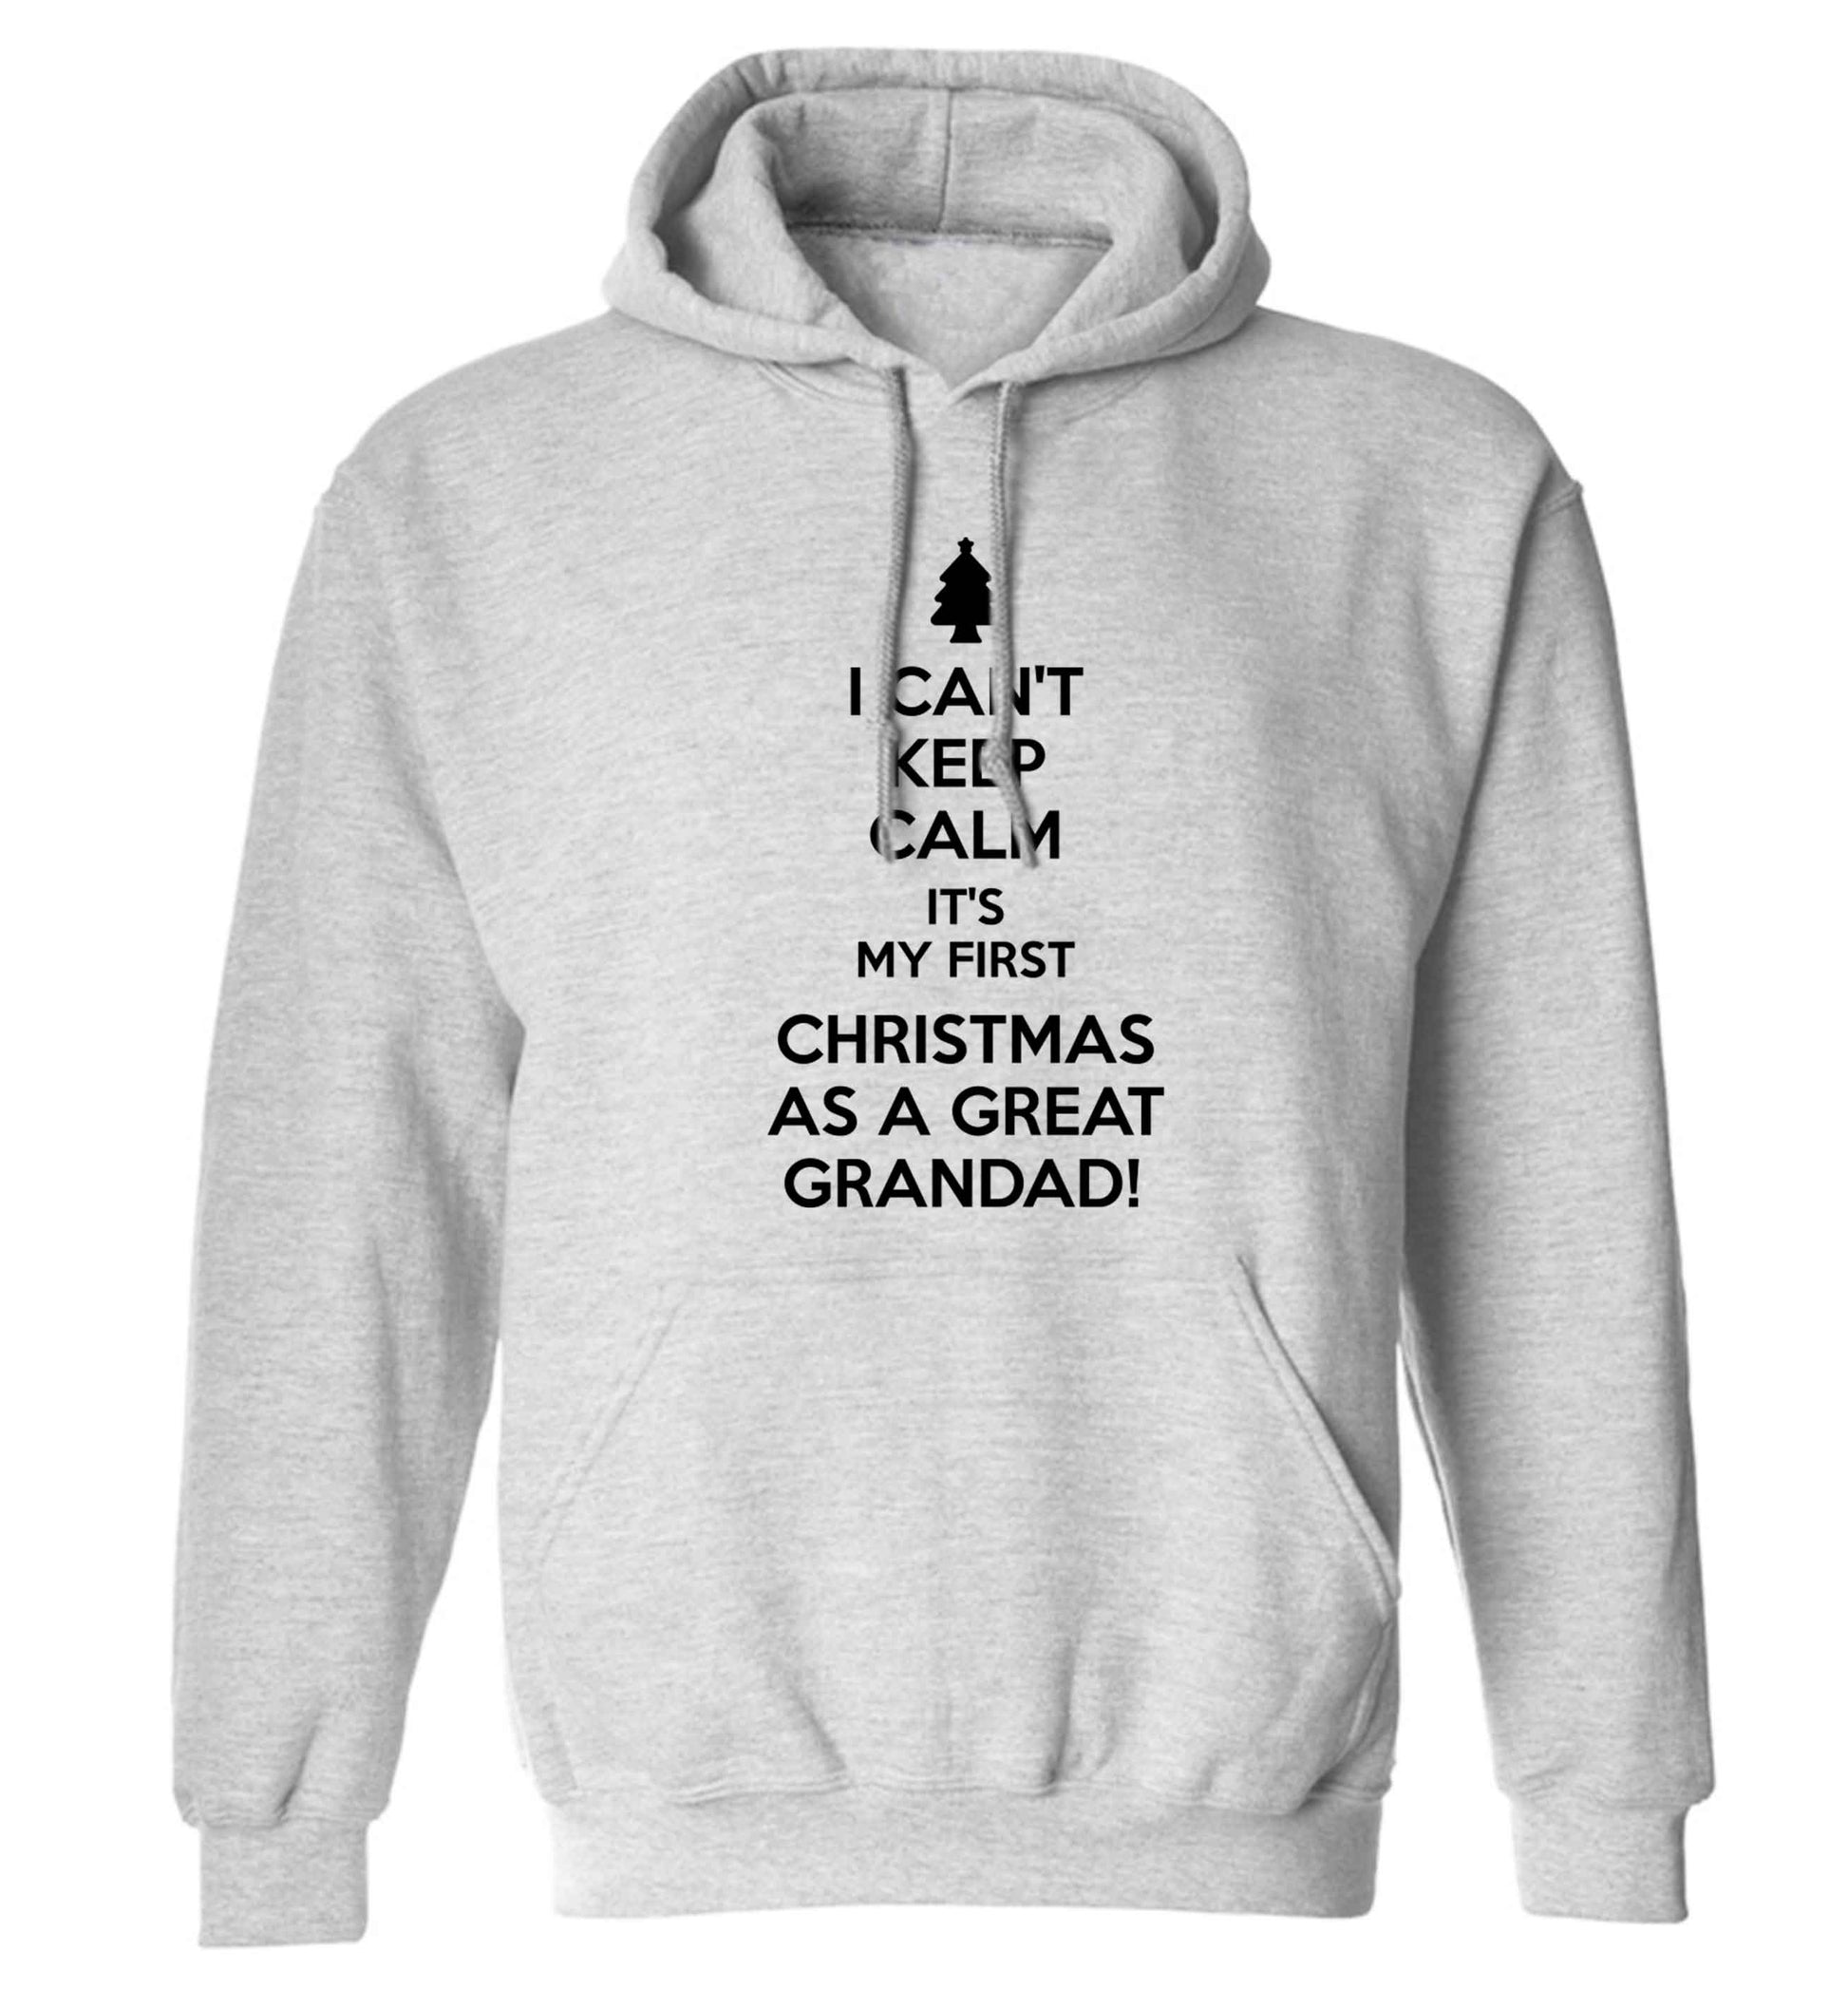 I can't keep calm it's my first Christmas as a great grandad! adults unisex grey hoodie 2XL